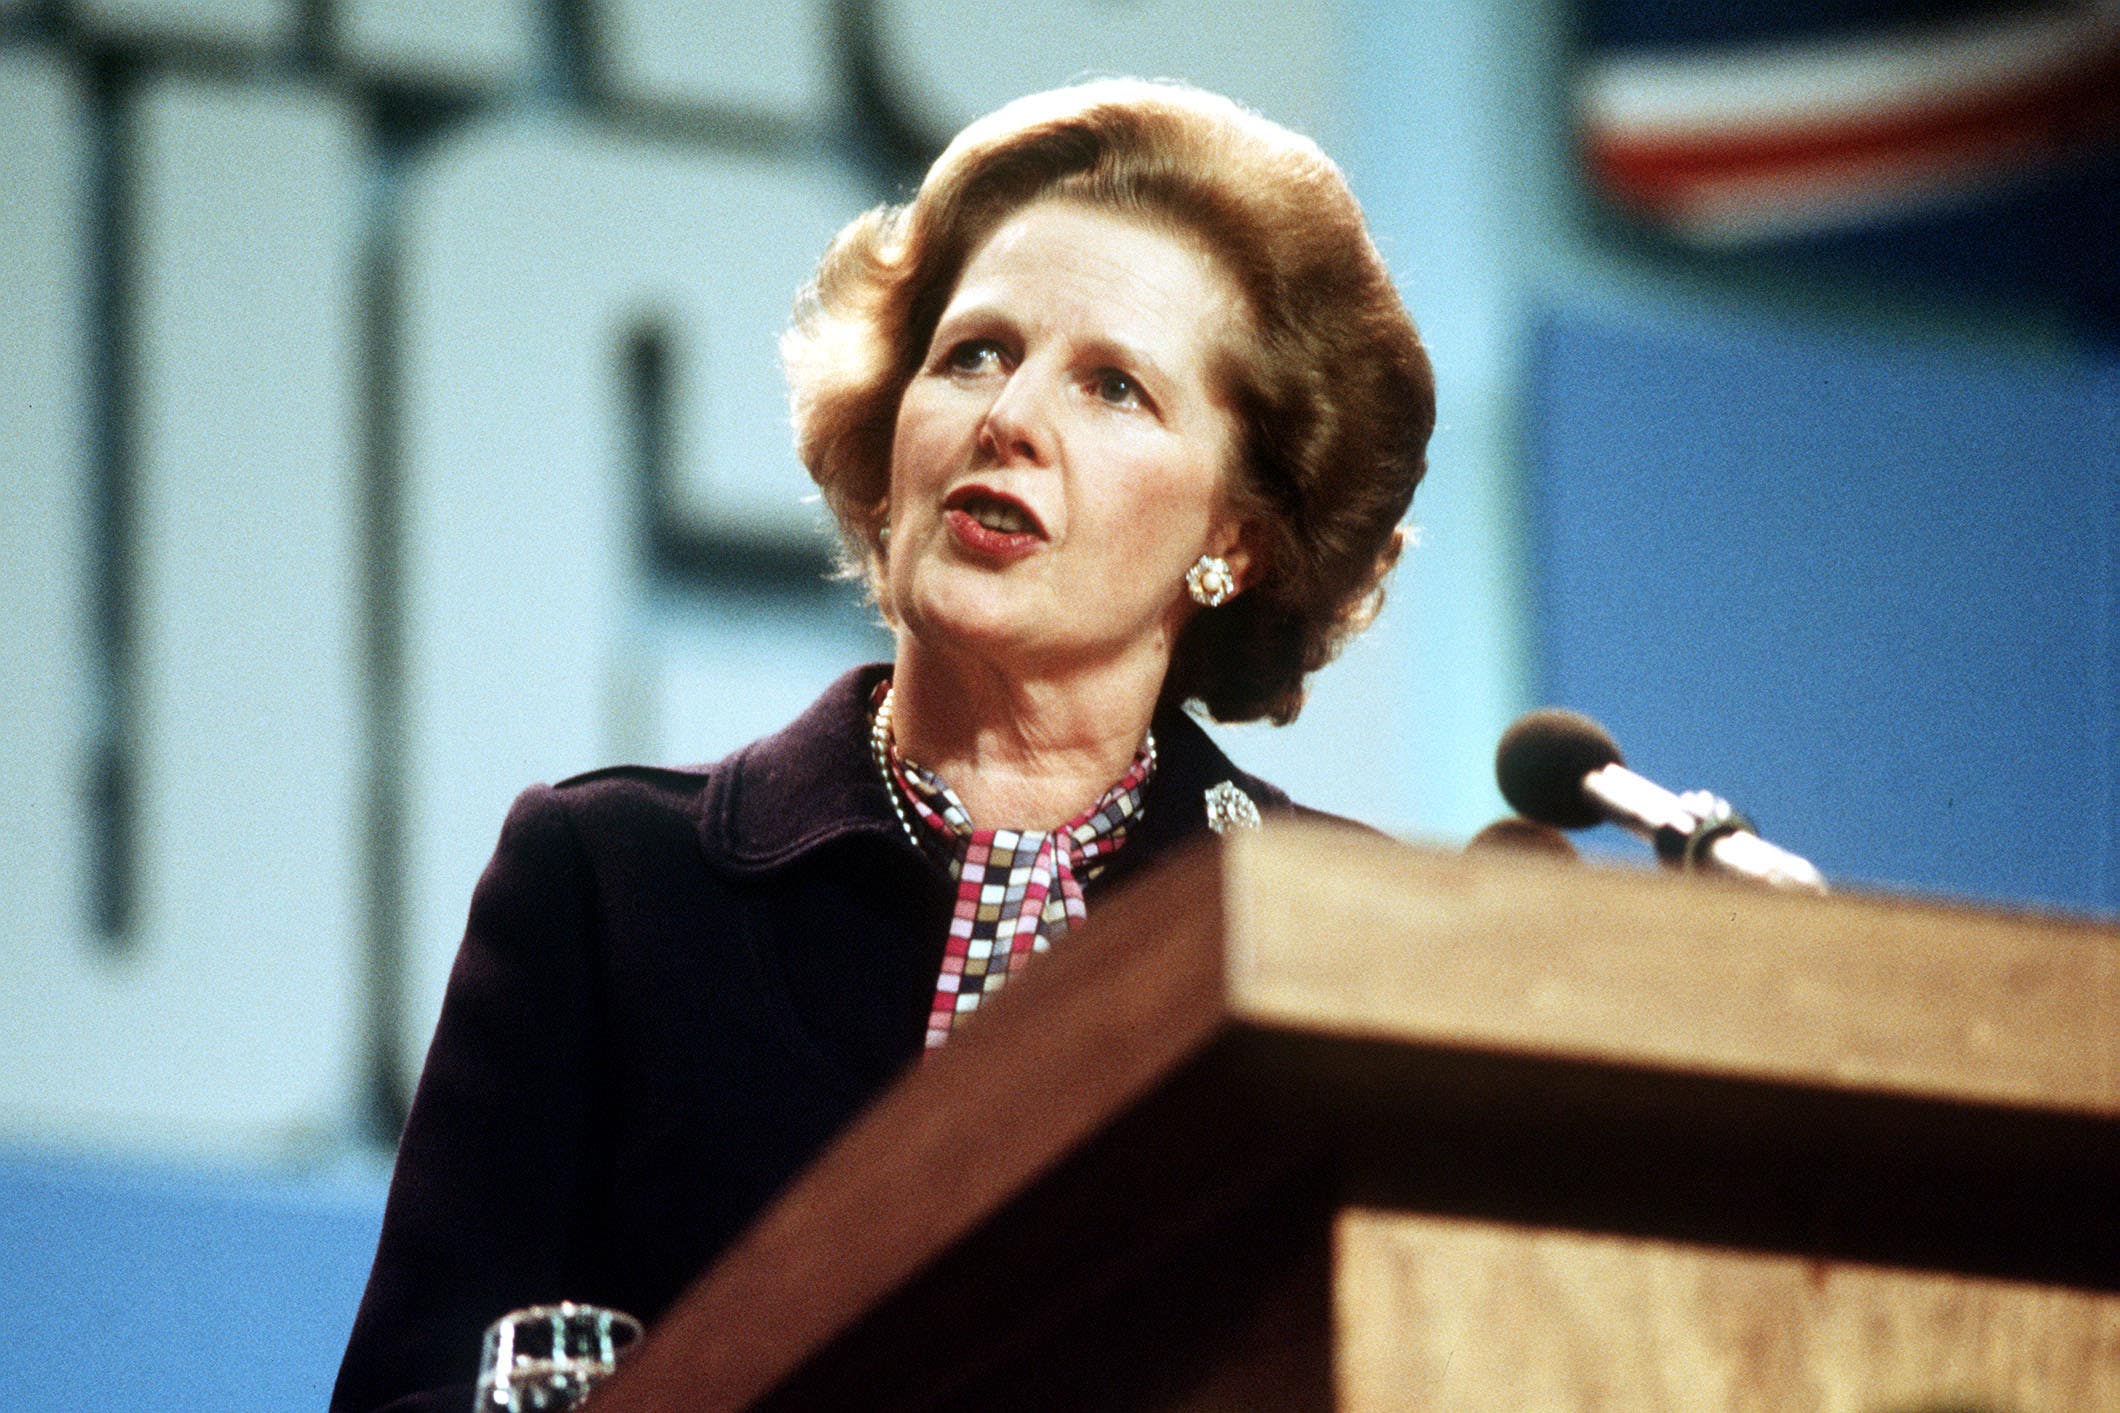 In 1987, Margaret Thatcher declared: ‘There is no such thing as society – there are individual men and women, and there are families’